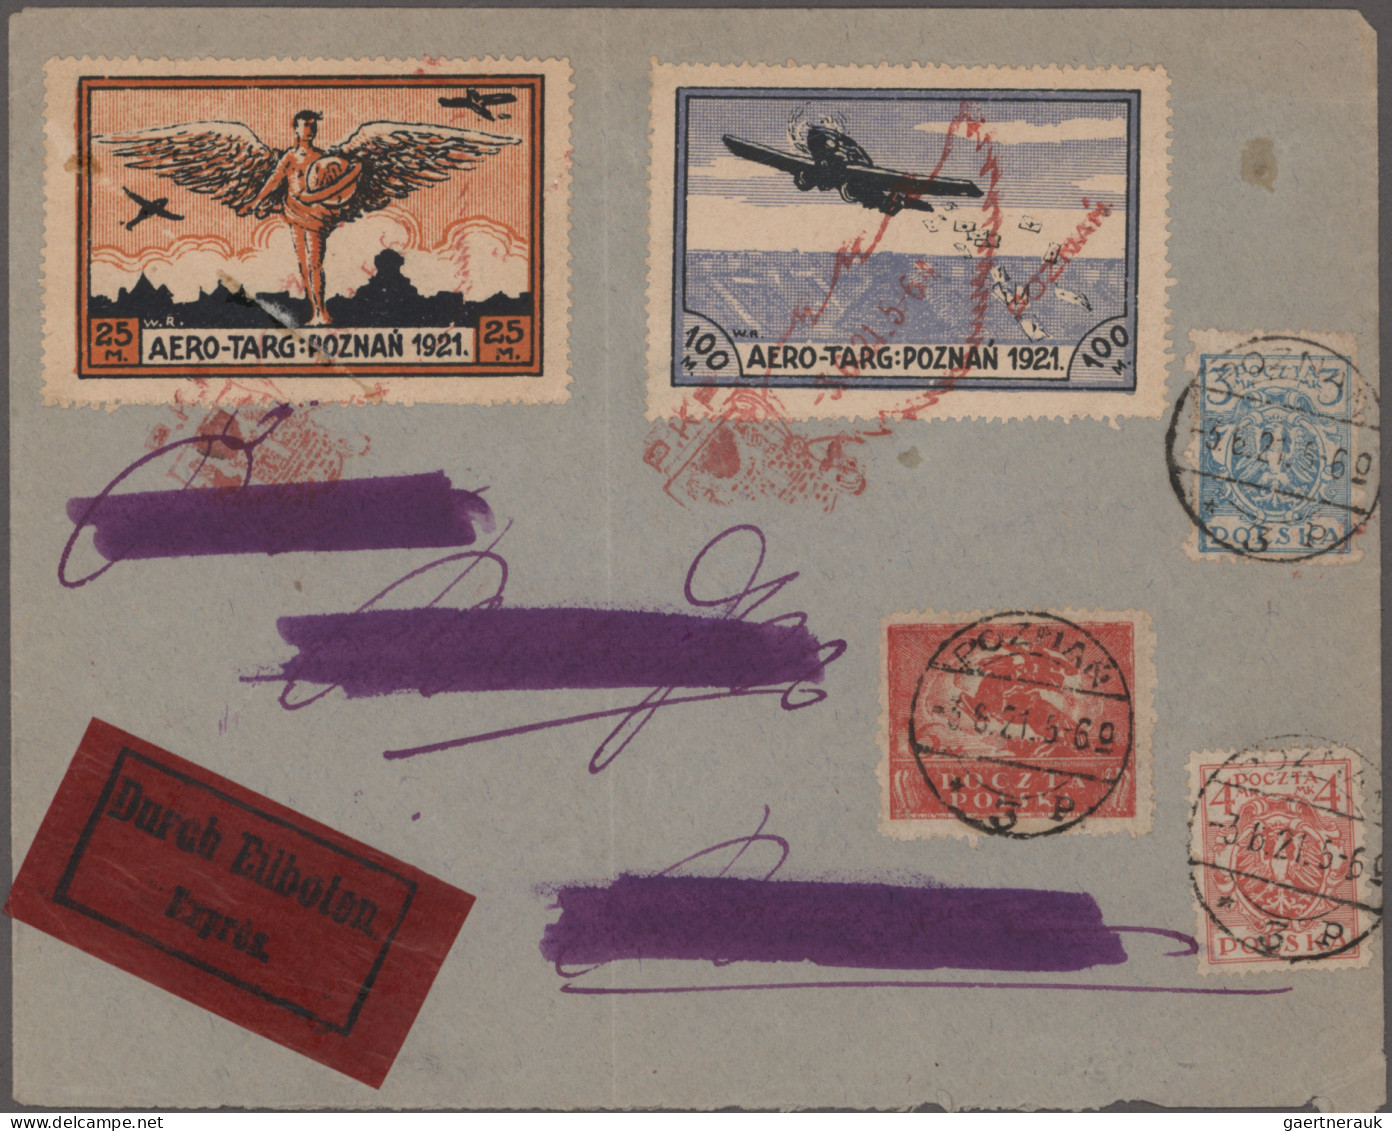 Poland: 1918/1980 (ca.), exciting lot of covers and stationaries, a few hundred,